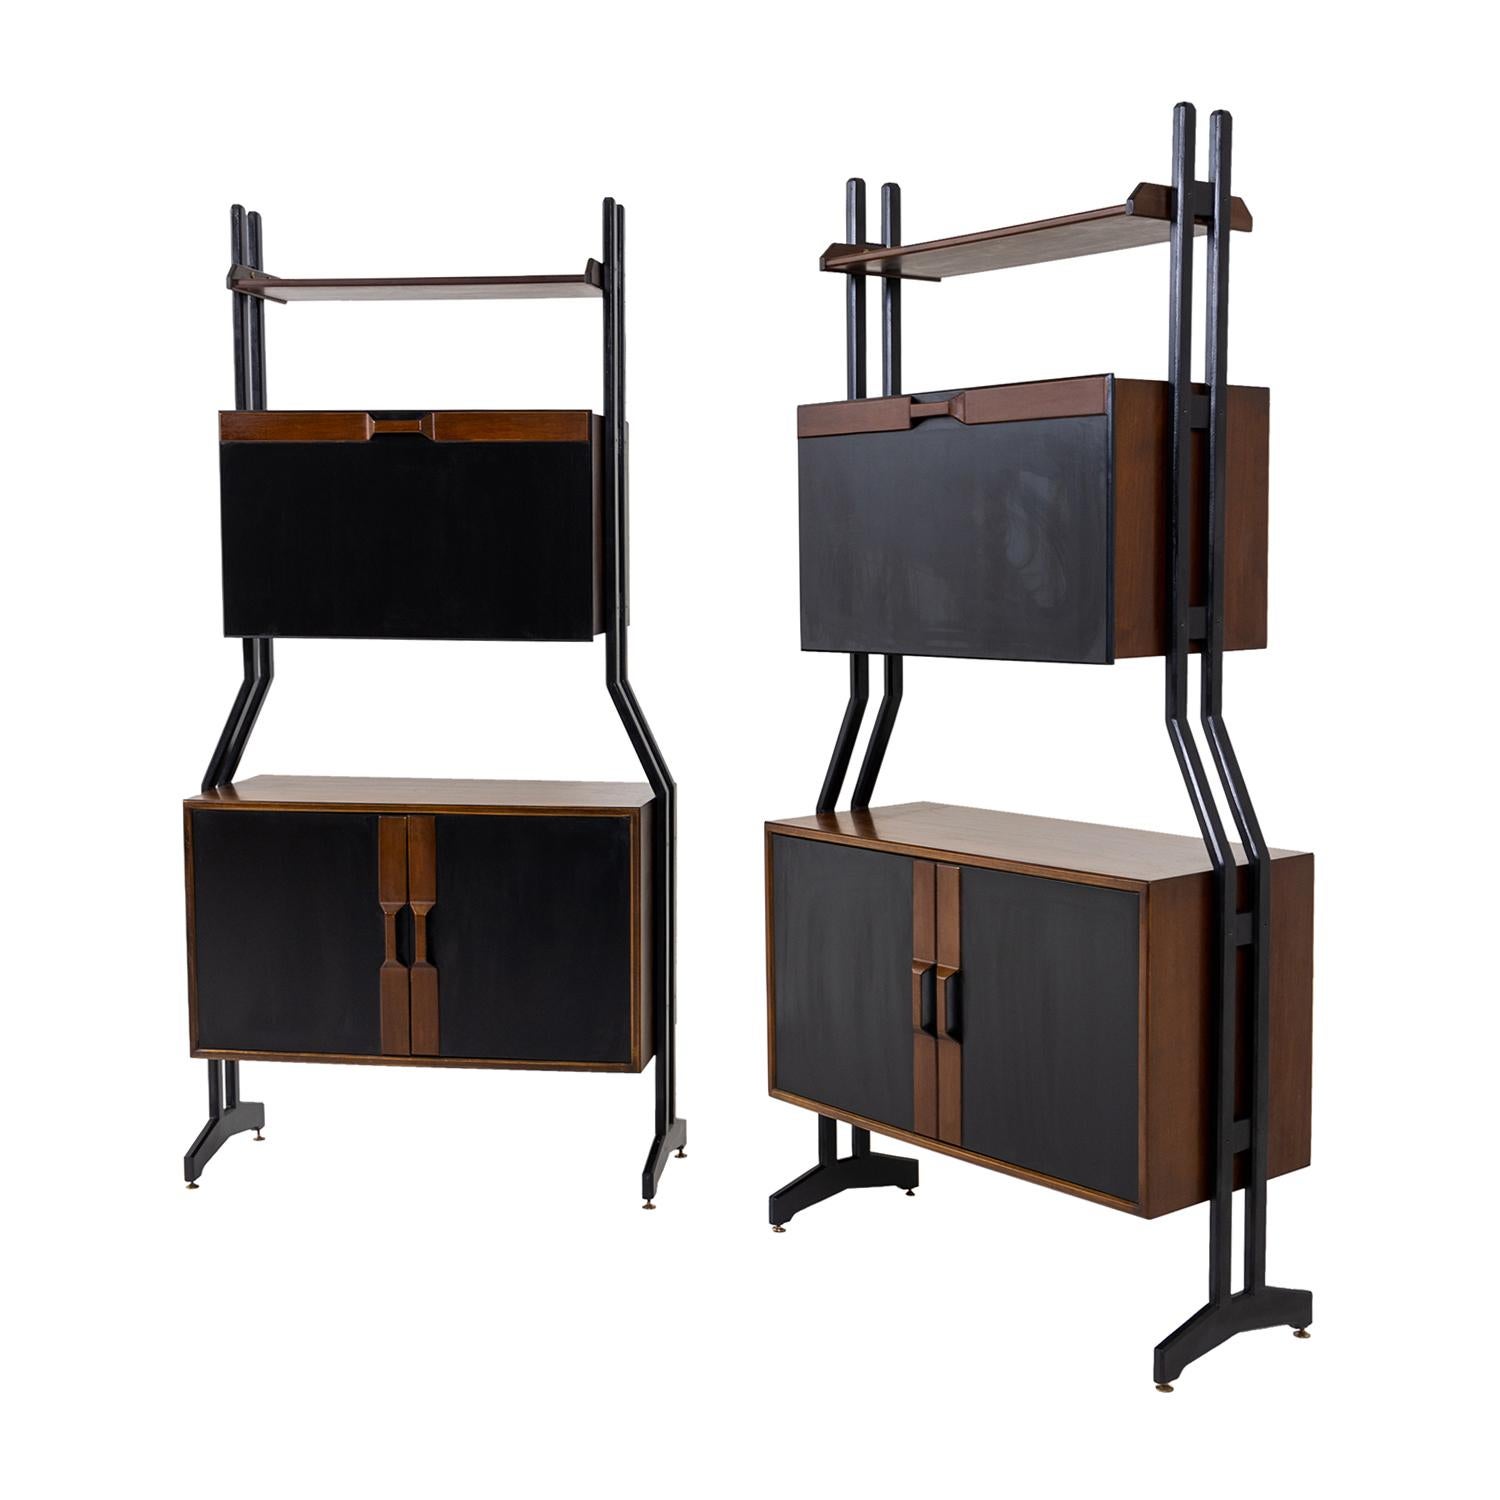 A dark-brown, vintage Mid-Century modern Italian pair of slim bookshelves with a top rack made of hand crafted polished Walnut and Rosewood, designed most likely by Vittorio Dassi in good condition. The upper part is composed with a foldable door,